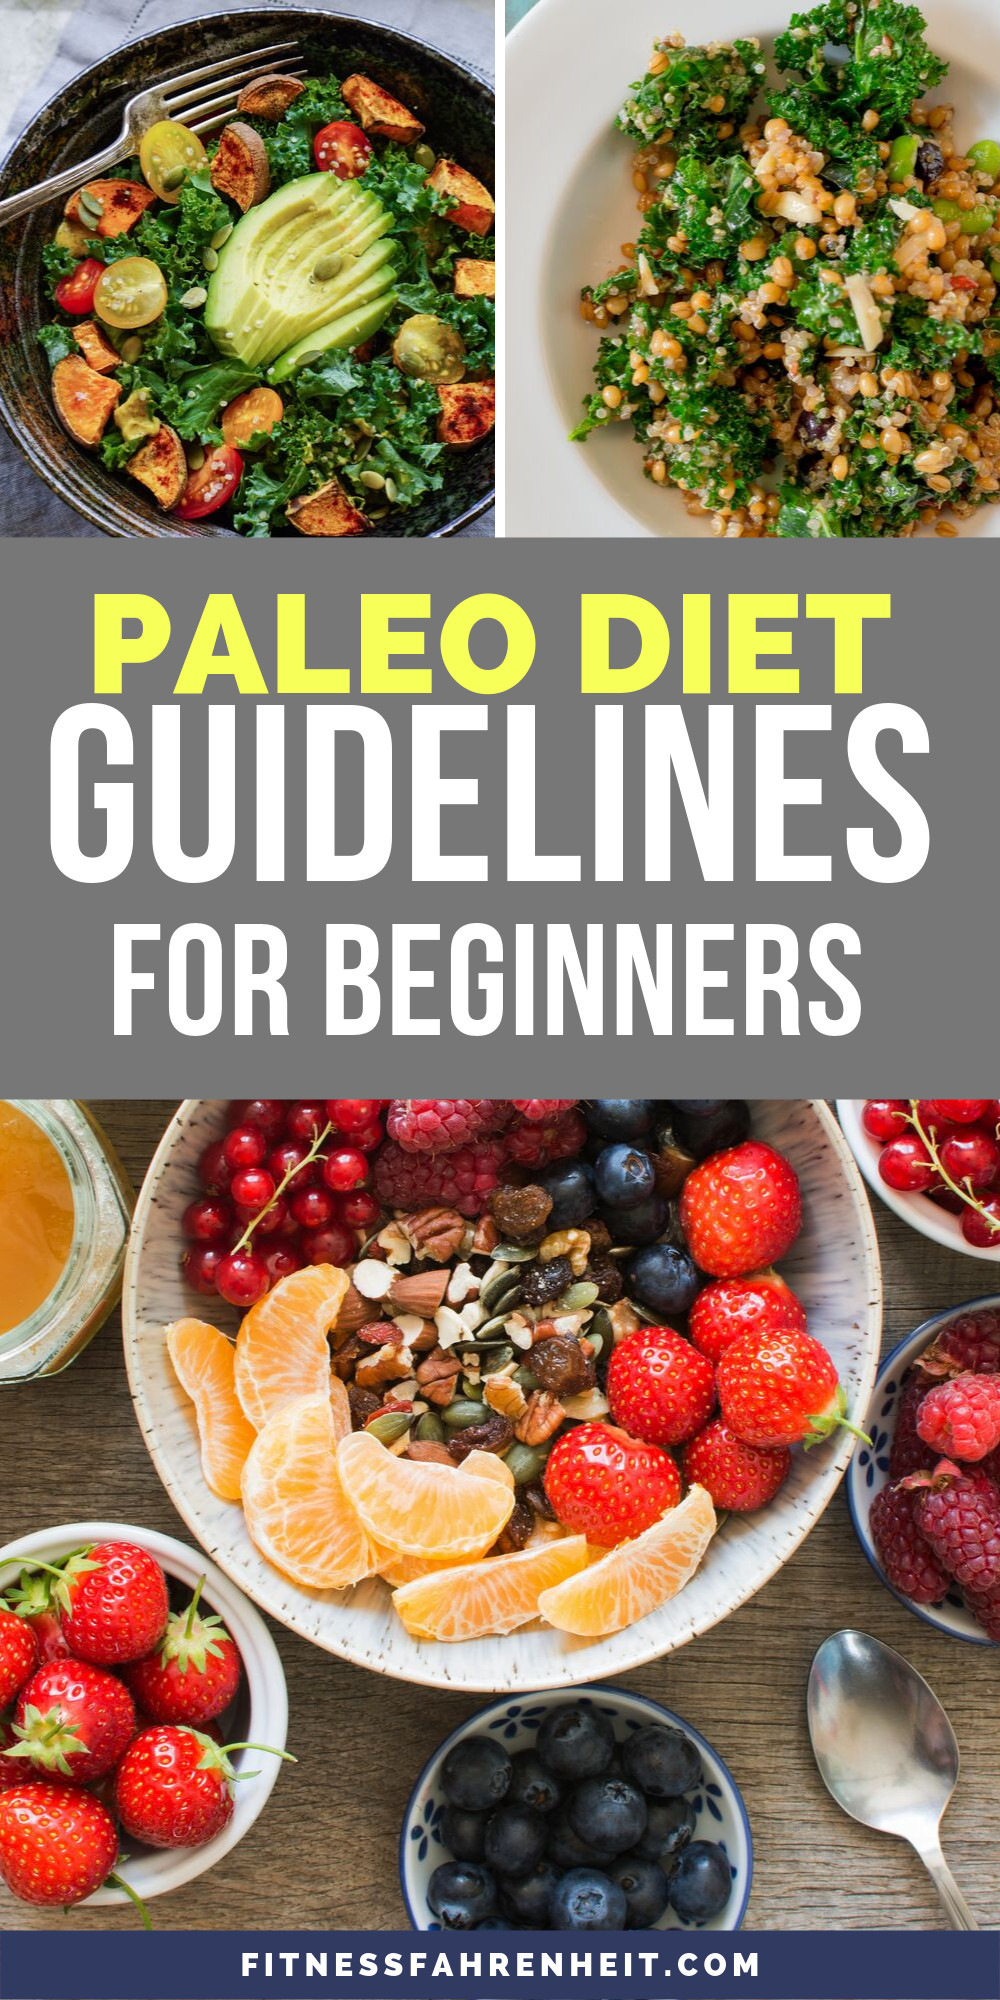 Paleo Diet Facts
 Paleo Diet Guidelines for Beginners